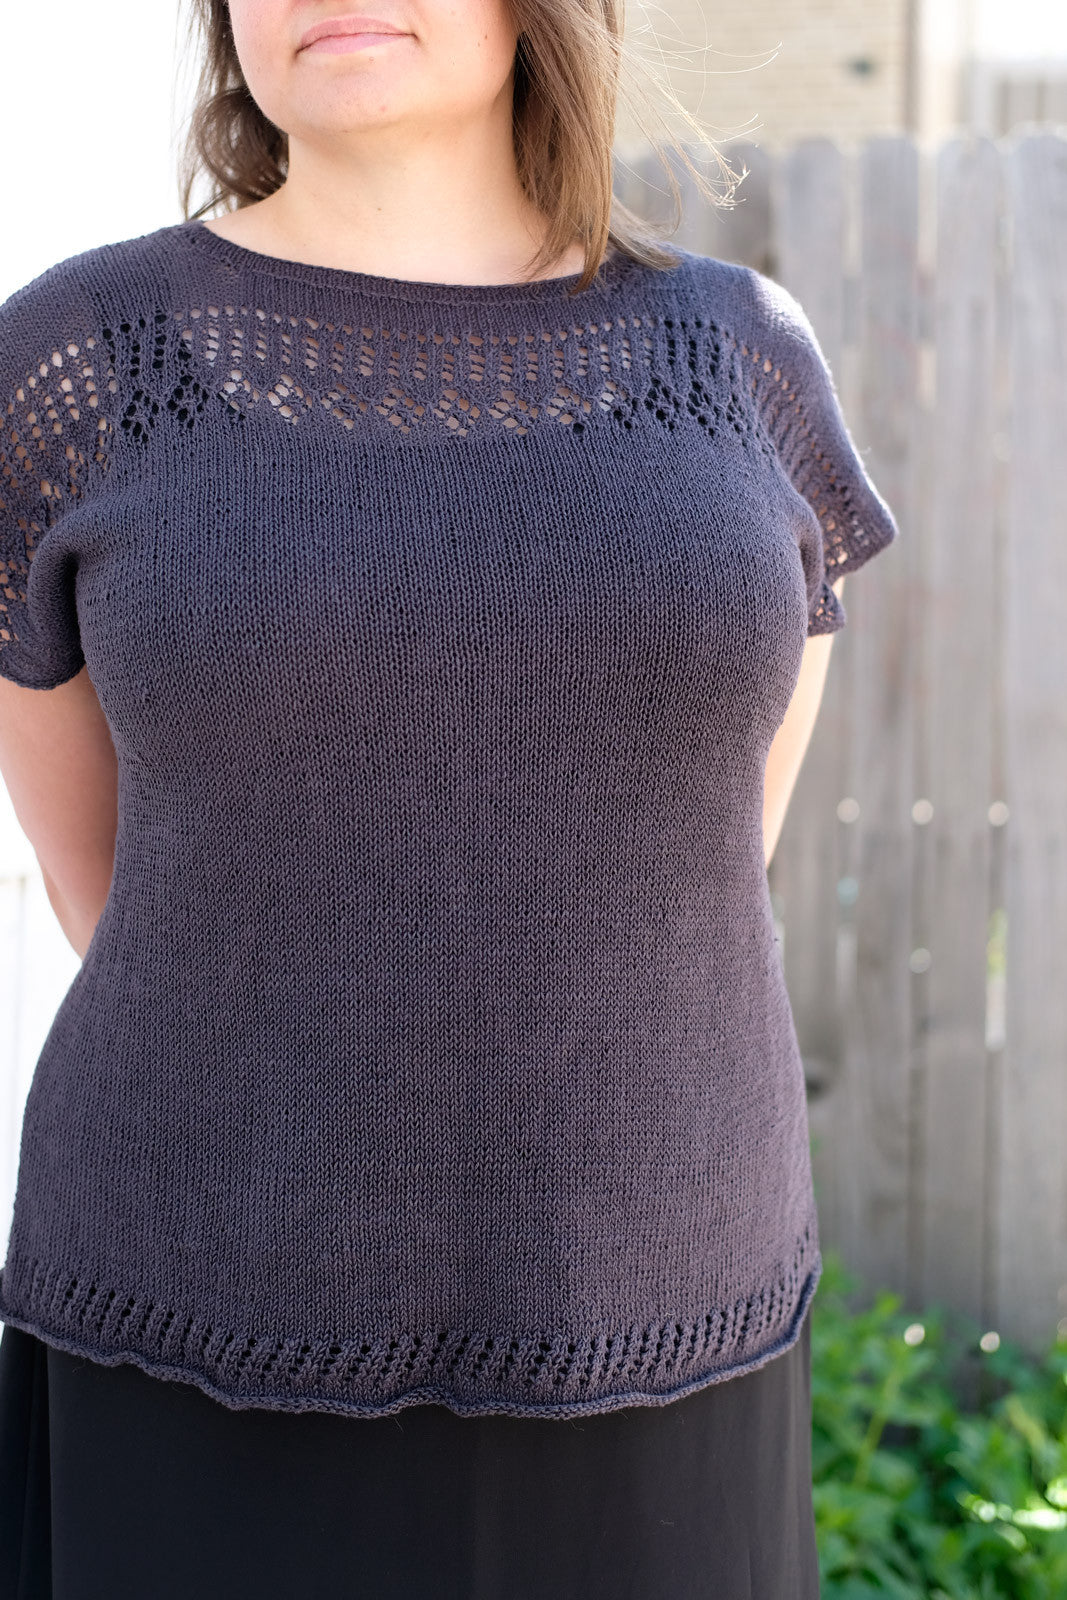 Jenn's Cullum Tee in Quince and Co. Sparrow